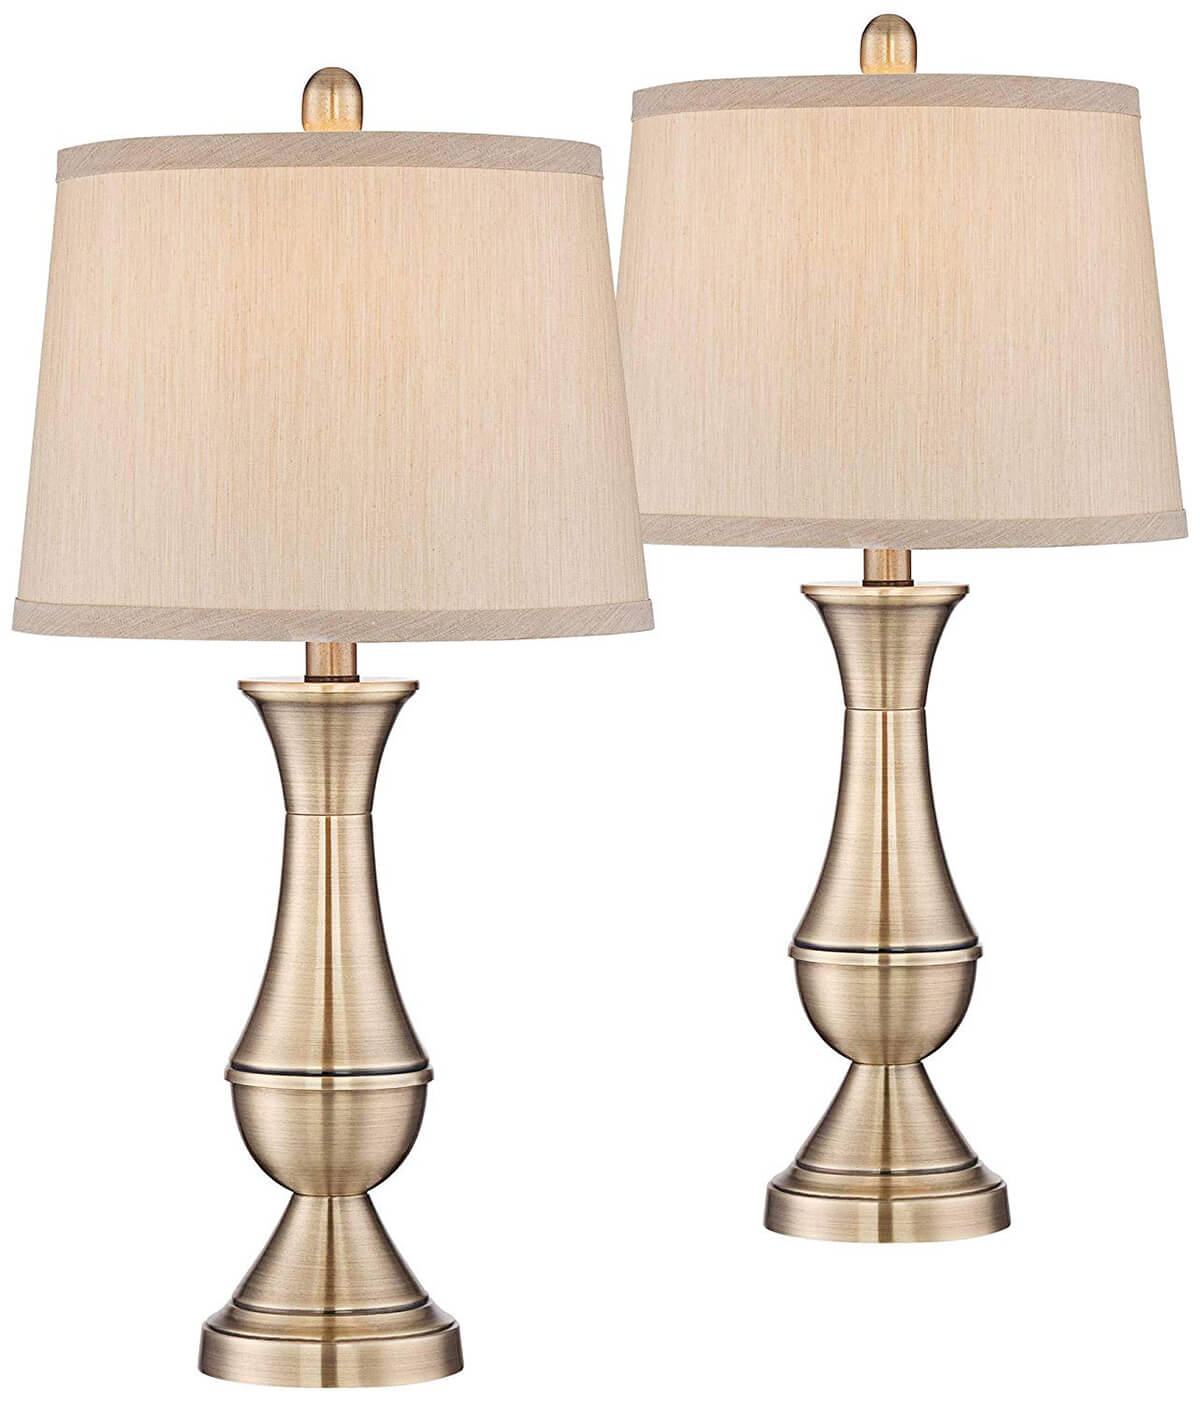 25 Best Bedside Table Lamps To Light Up, Modern Traditional Table Lamps